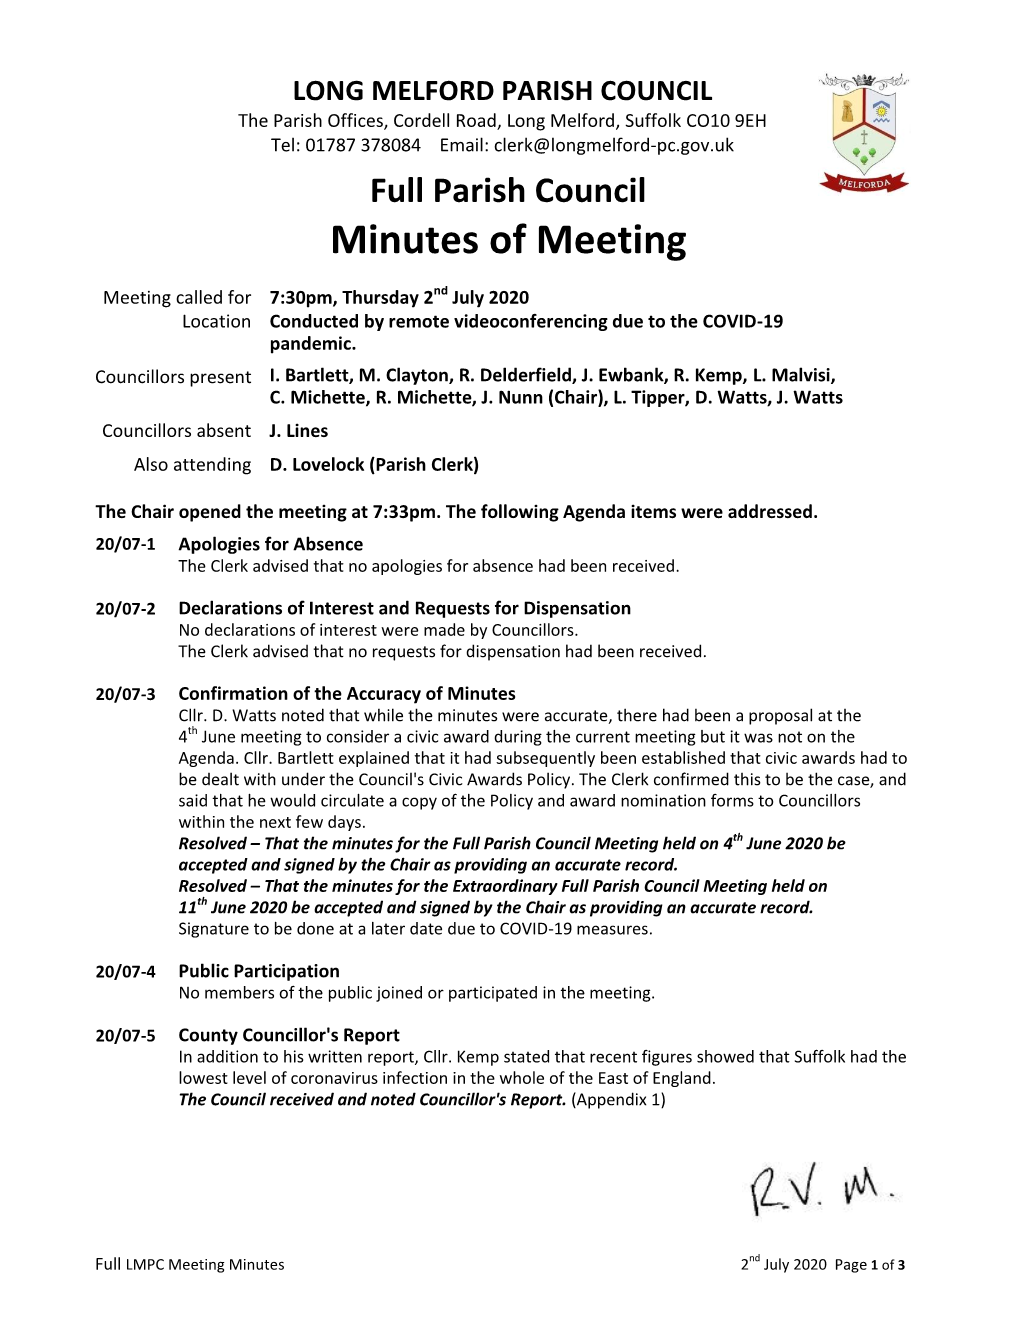 Full Parish Council Meeting 02/07/2020 – Approved Minutes